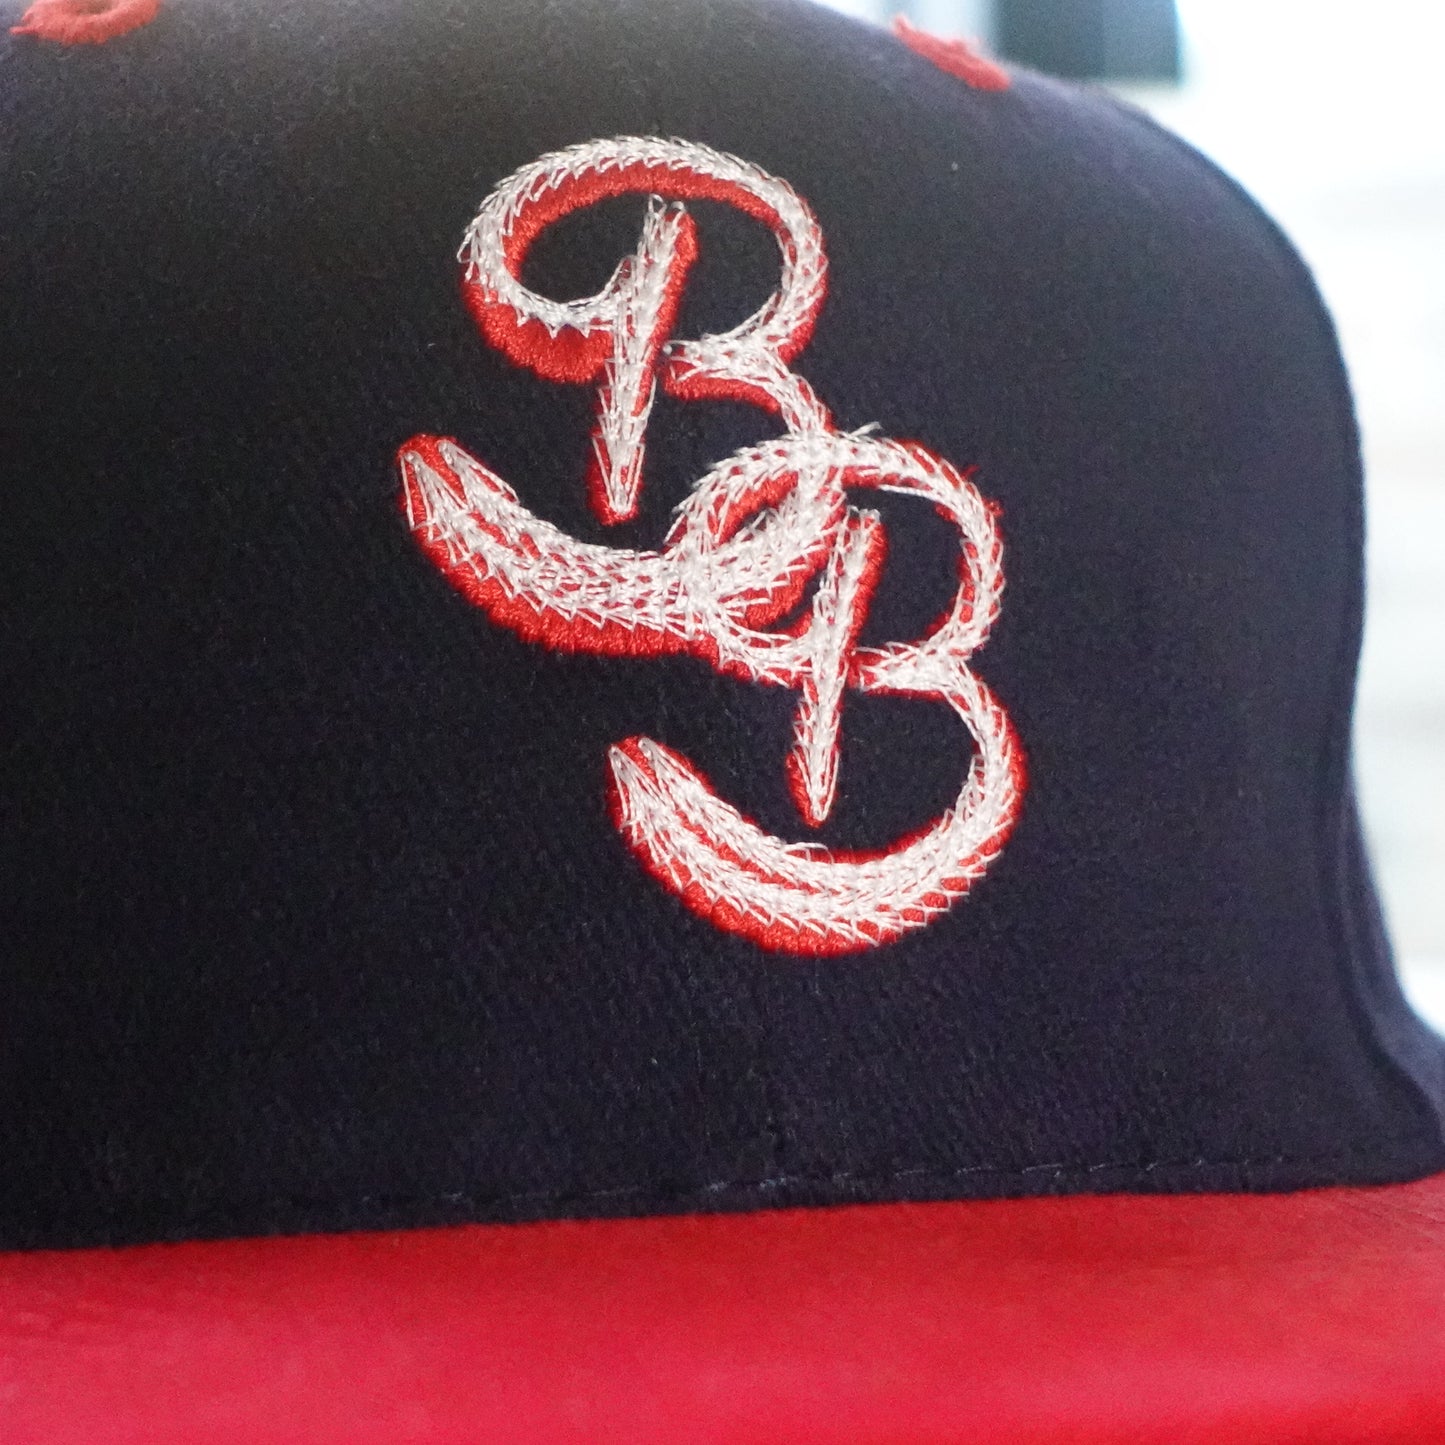 BB Couture Signature Cap with Exclusive double B chain stitching